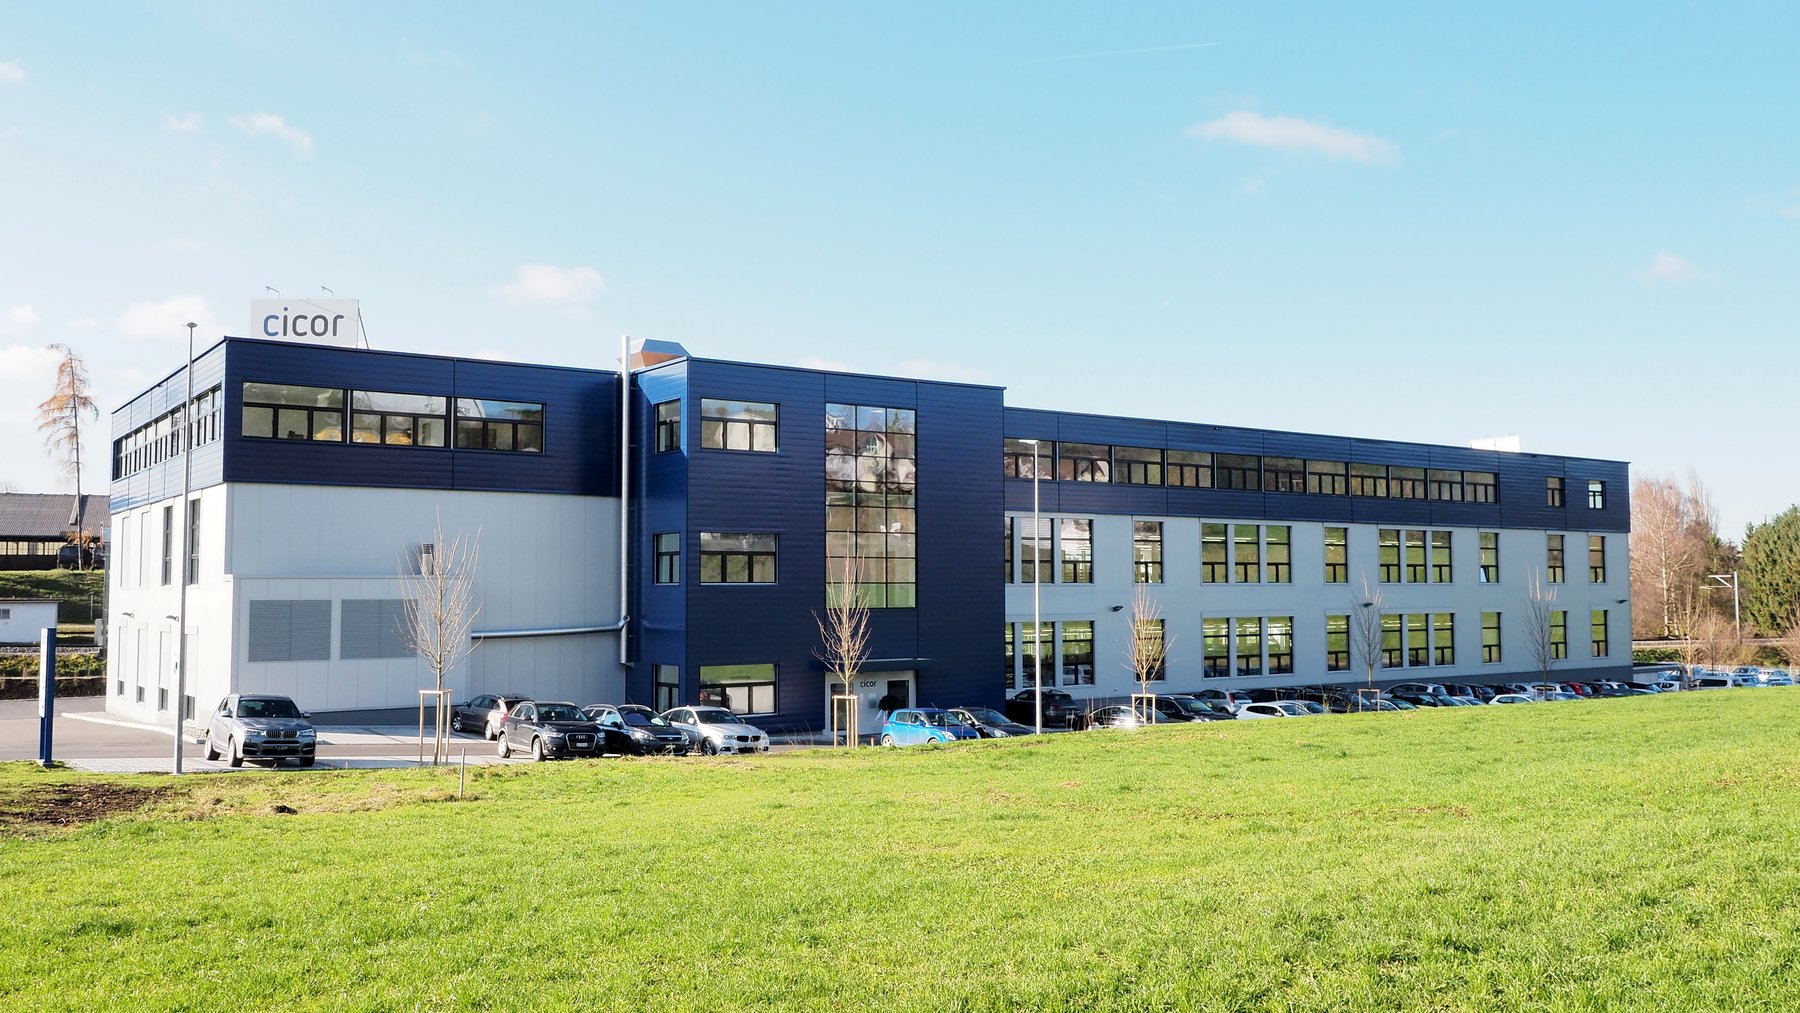 Cicor production site in Bronschhofen, Switzerland 